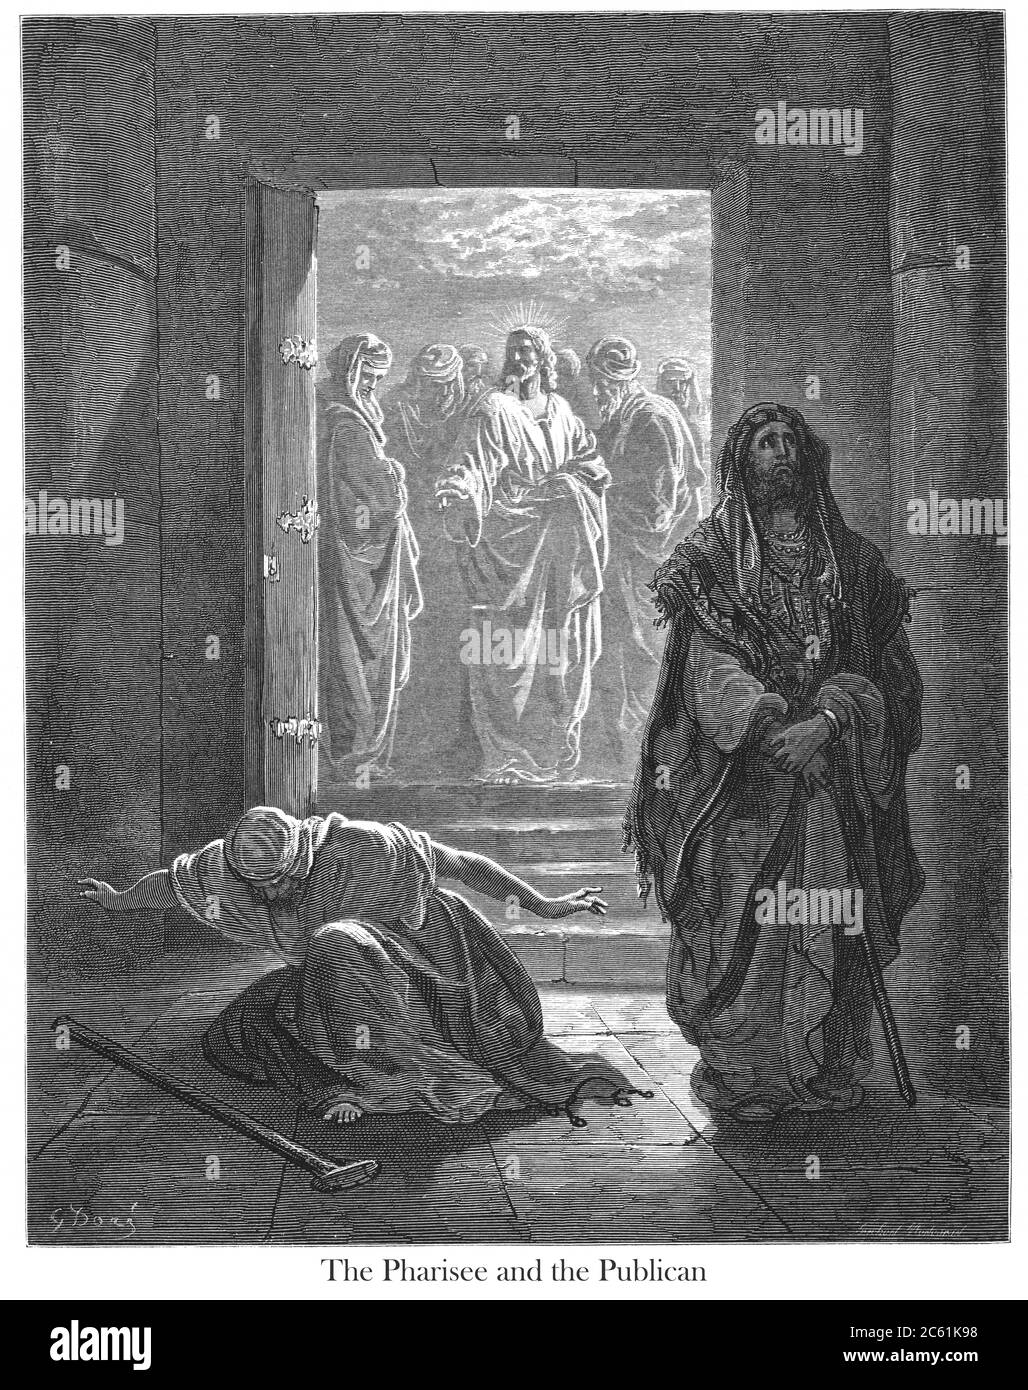 The Pharisee and the Publican [Luke 18:11-13] From the book 'Bible Gallery' Illustrated by Gustave Dore with Memoir of Dore and Descriptive Letter-press by Talbot W. Chambers D.D. Published by Cassell & Company Limited in London and simultaneously by Mame in Tours, France in 1866 Stock Photo